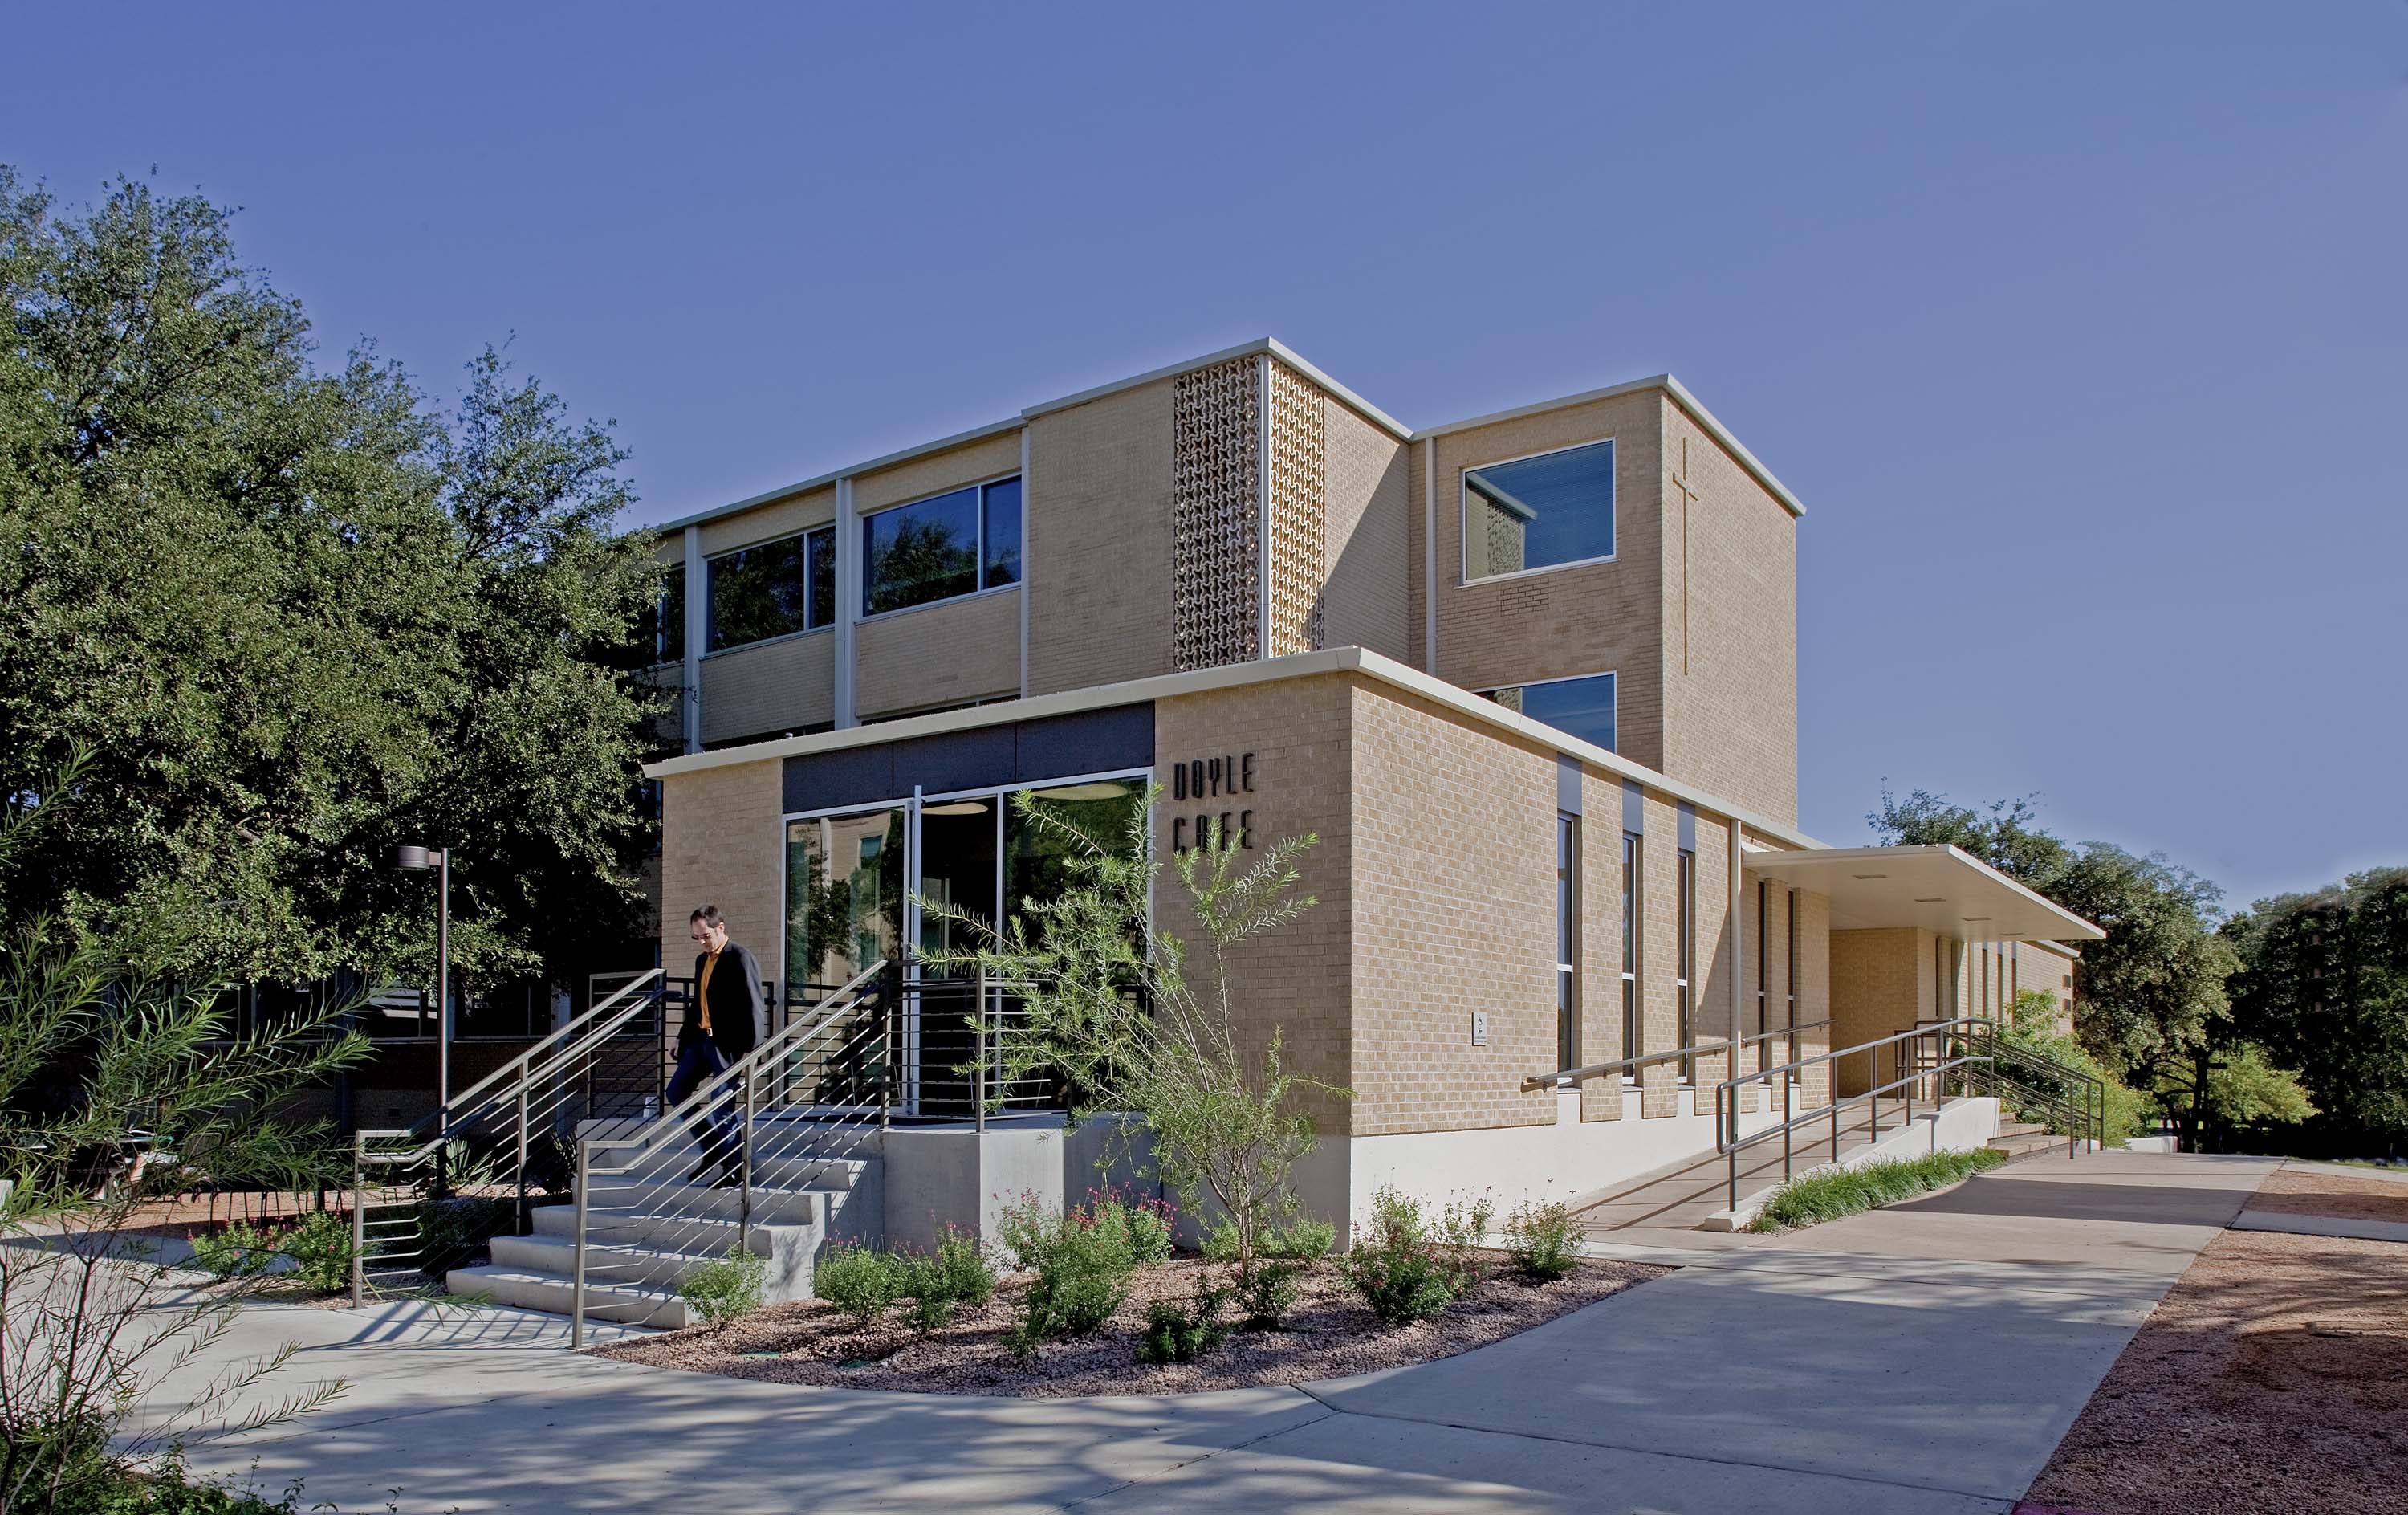 Exterior of Doyle Hall by Specht Novak Architects, shot by Taggart Sorensen.